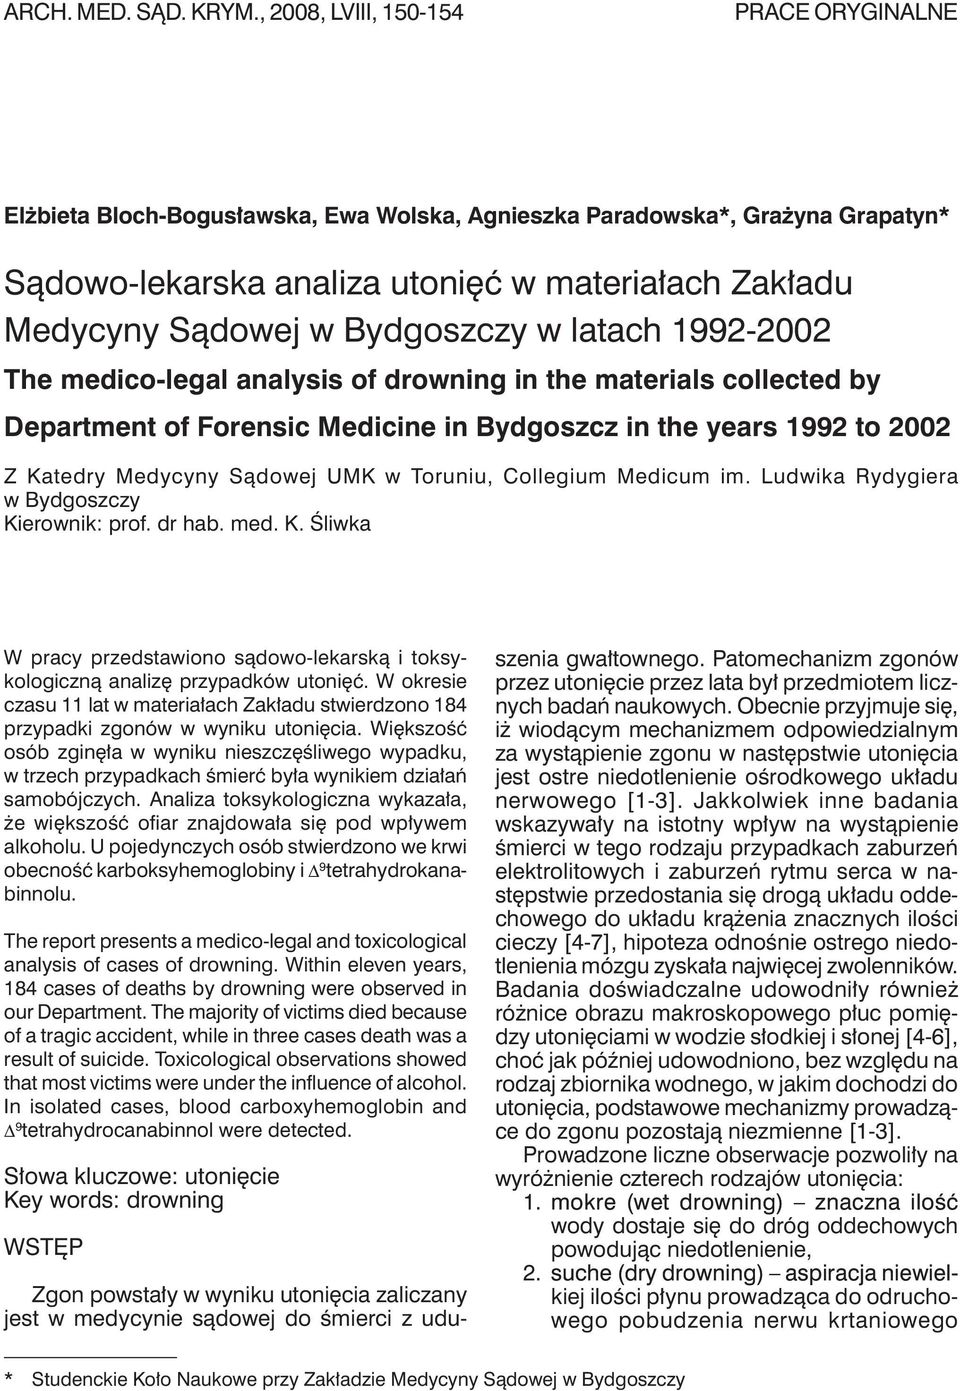 bydgoszczy w latach 199-00 The medico-legal analysis of drowning in the materials collected by Department of Forensic Medicine in Bydgoszcz in the years 199 to 00 z Katedry Medycyny Sądowej umk w